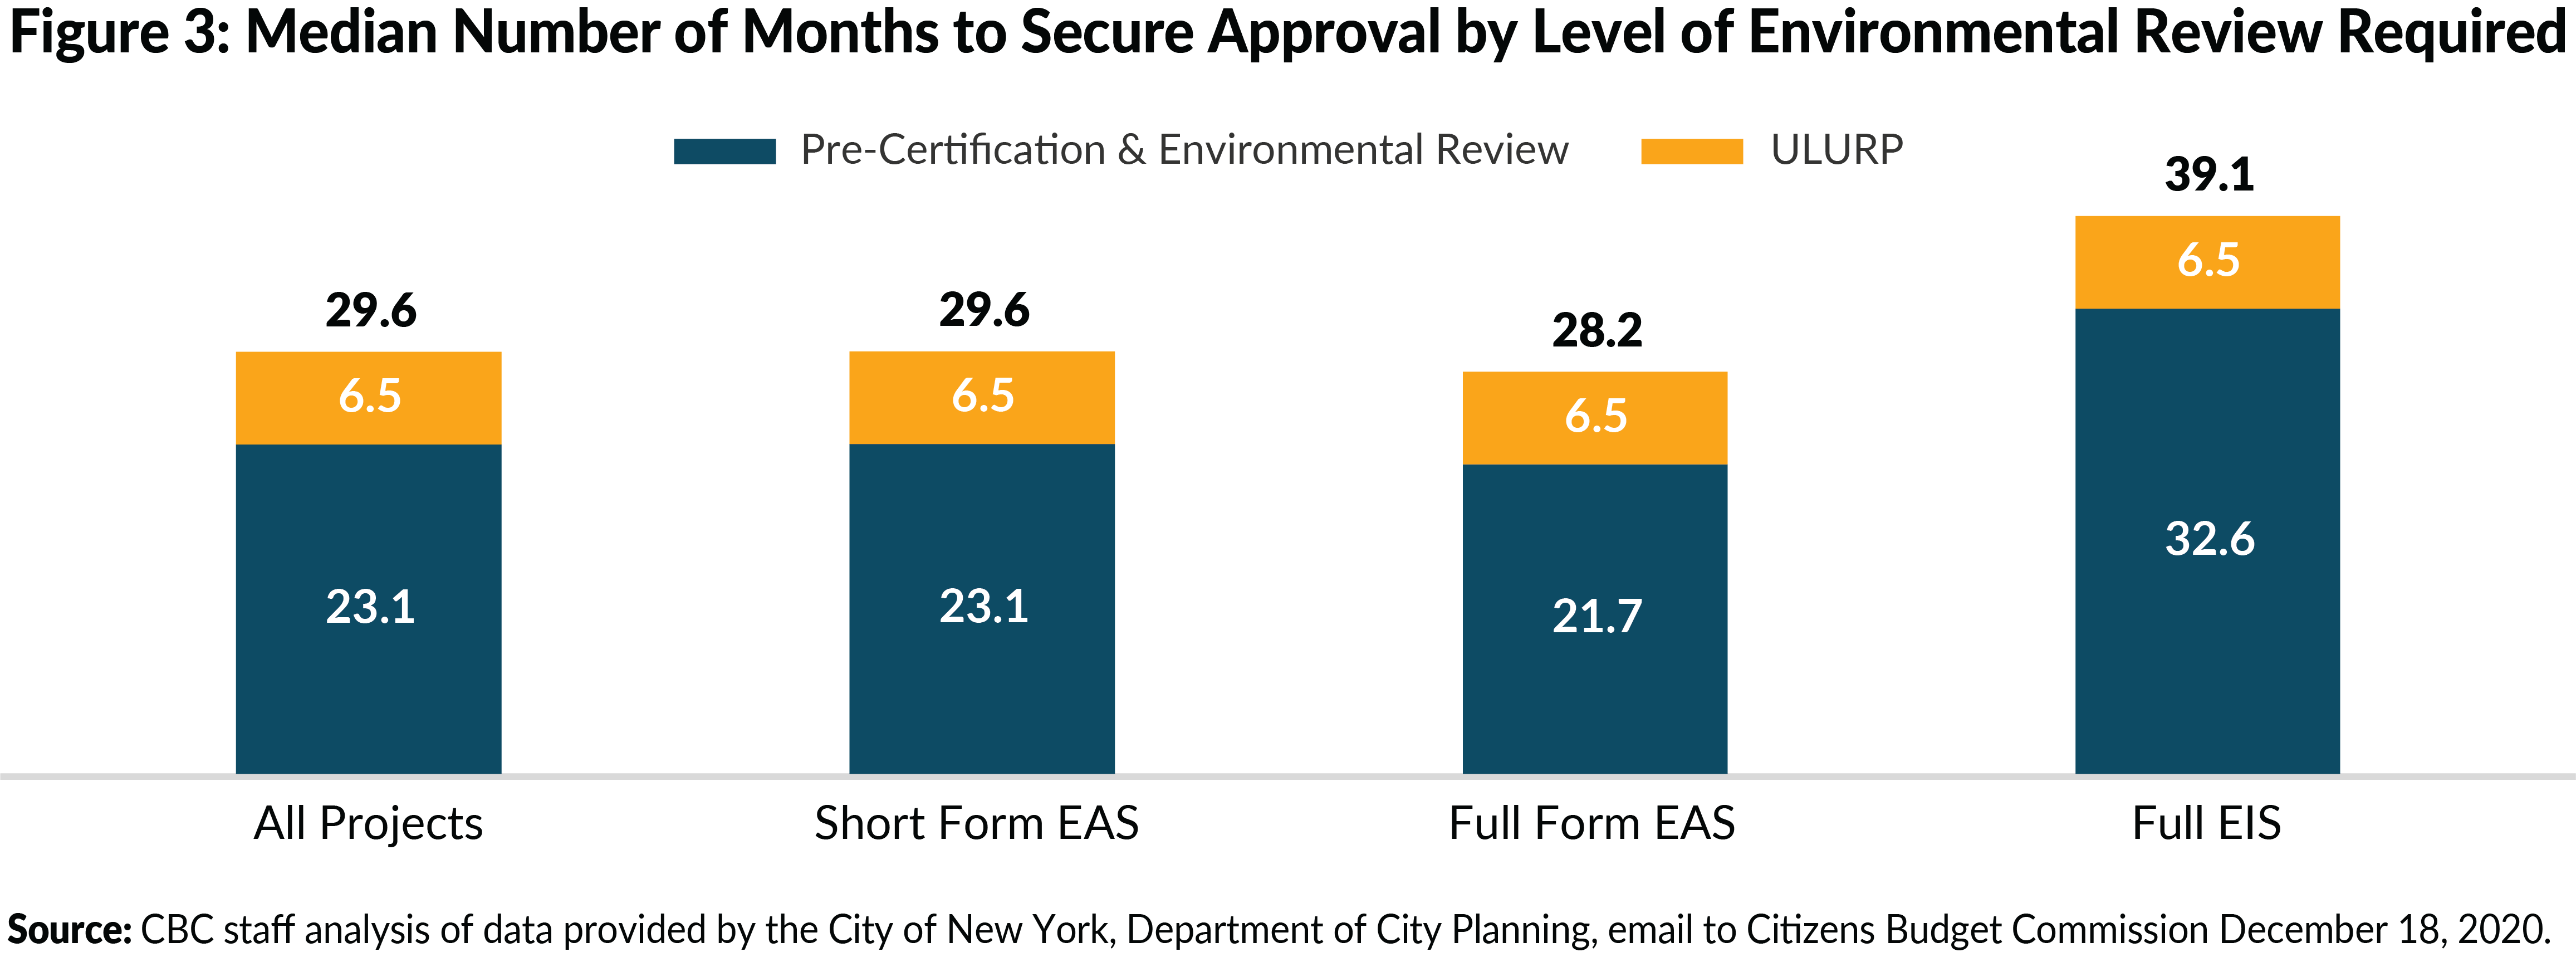 Figure 3: Median Number of Months to Secure Approval by Level of Environmental Review Required